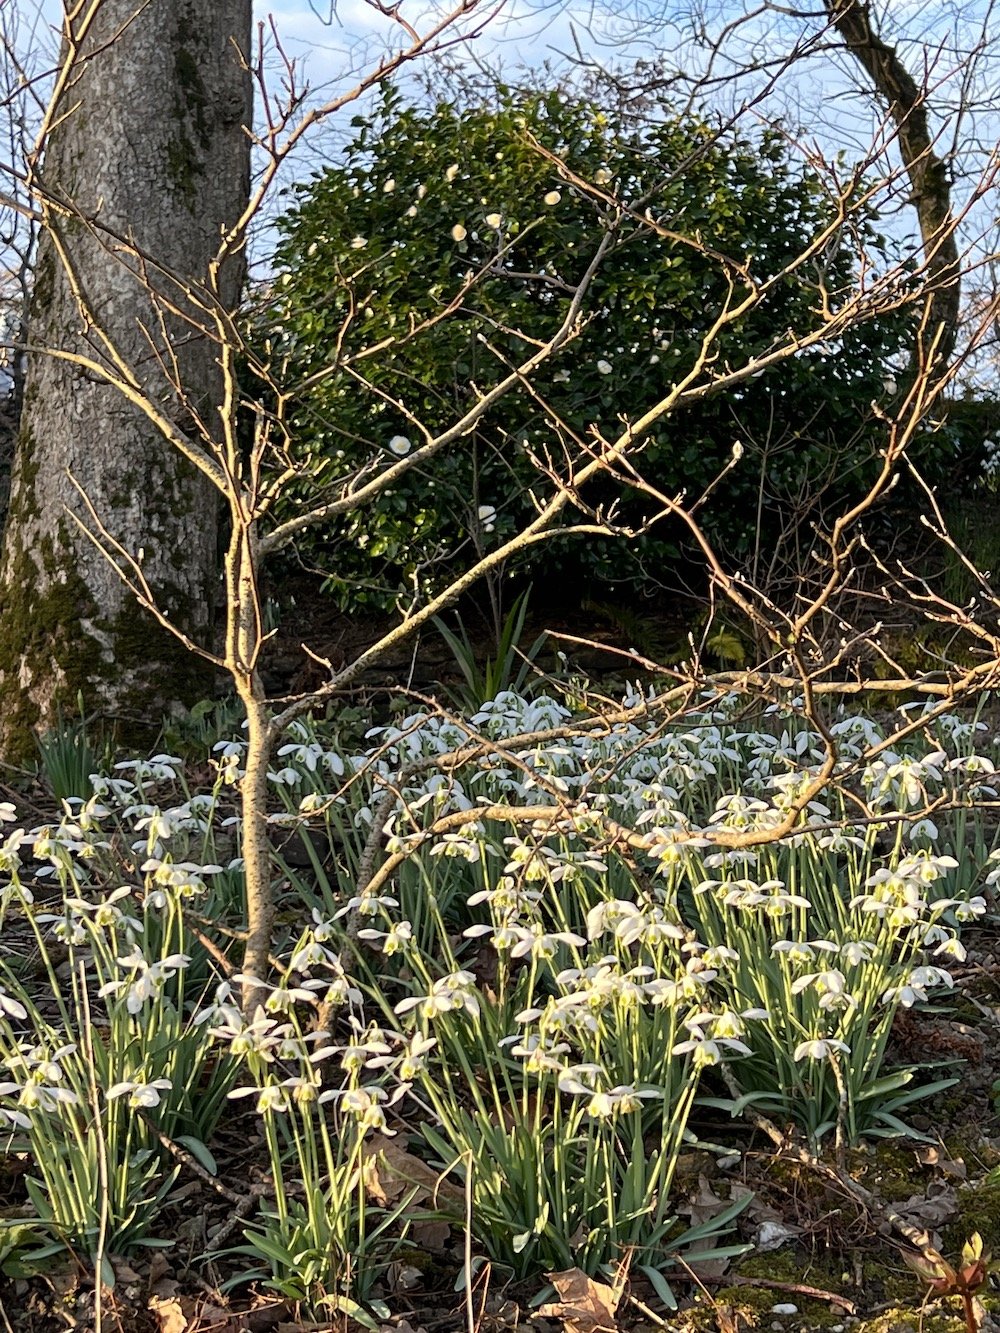 Carpets of Galanthus anticipate spring in Cornwall